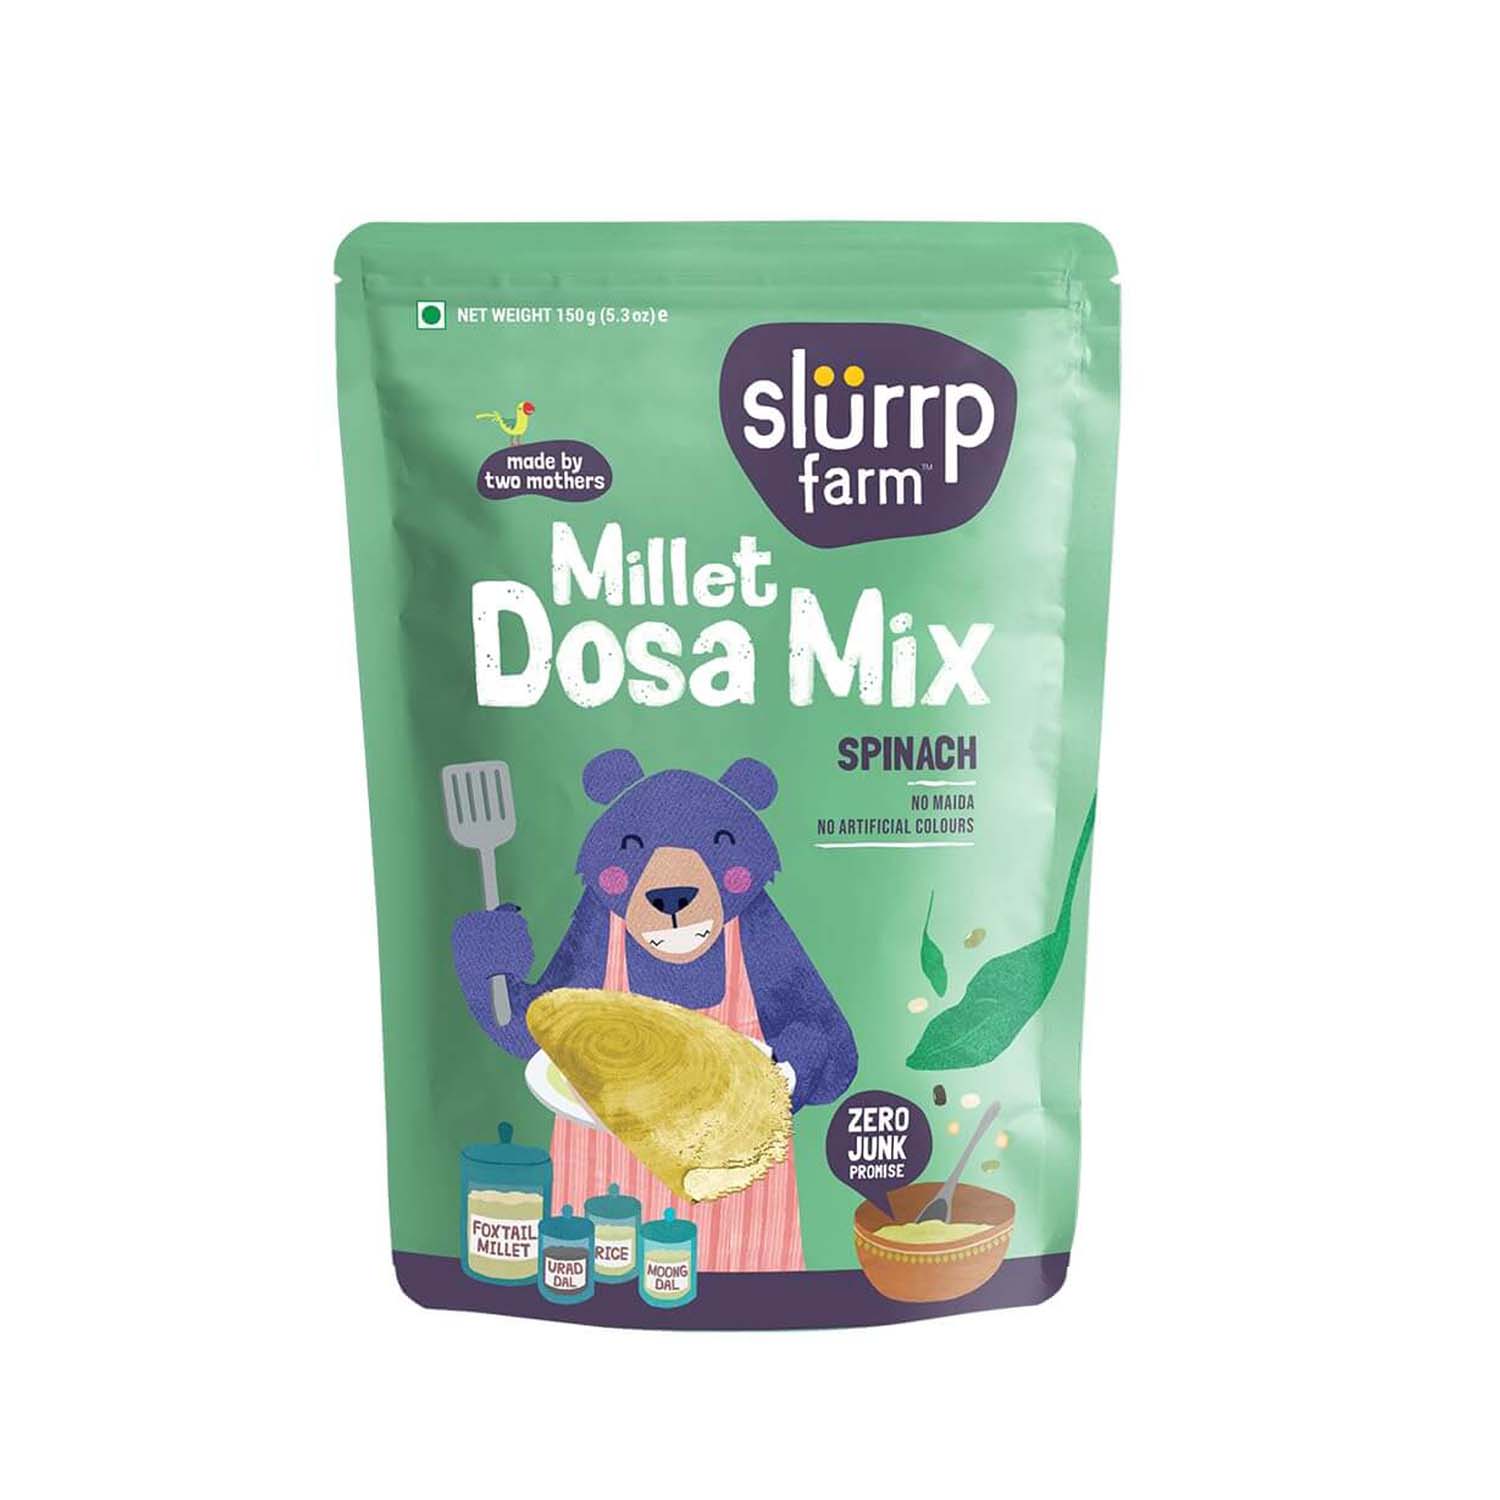 Buy Slurrp Farm Millet Dosa Mix with Spinach for Small Children - 150gms Online in India at uyyaala.com